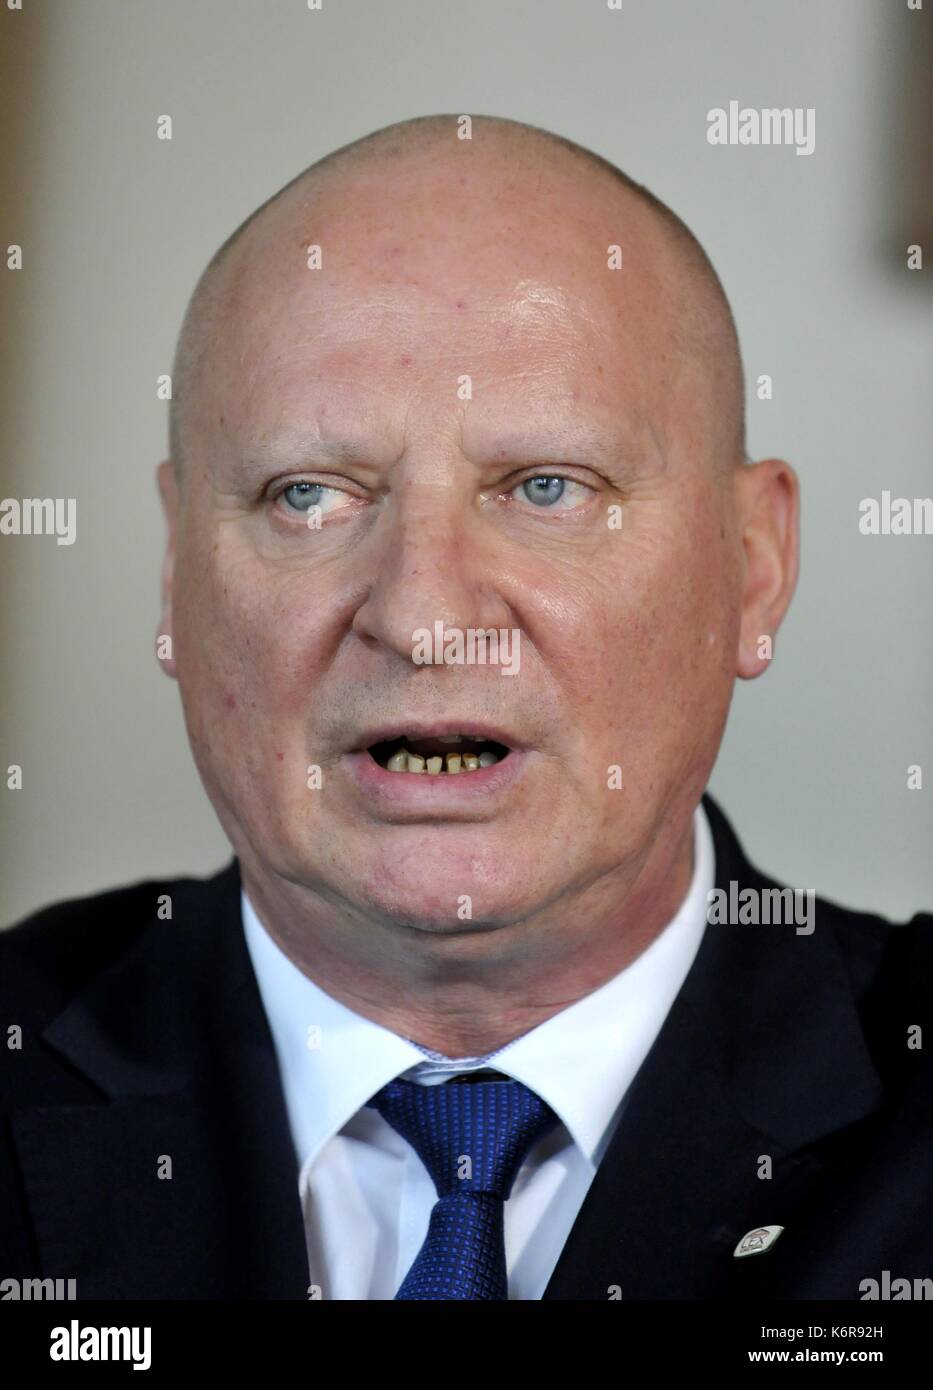 Brno, Czech Republic. 13th Sep, 2017. Polish prosecutor Krzysztof Parchimowicz attends the press conference Czech and Polish prosecutors on criticism of the controversial Polish judicial reform, in Brno, Czech Republic, on September 13, 2017. Credit: Igor Zehl/CTK Photo/Alamy Live News Stock Photo